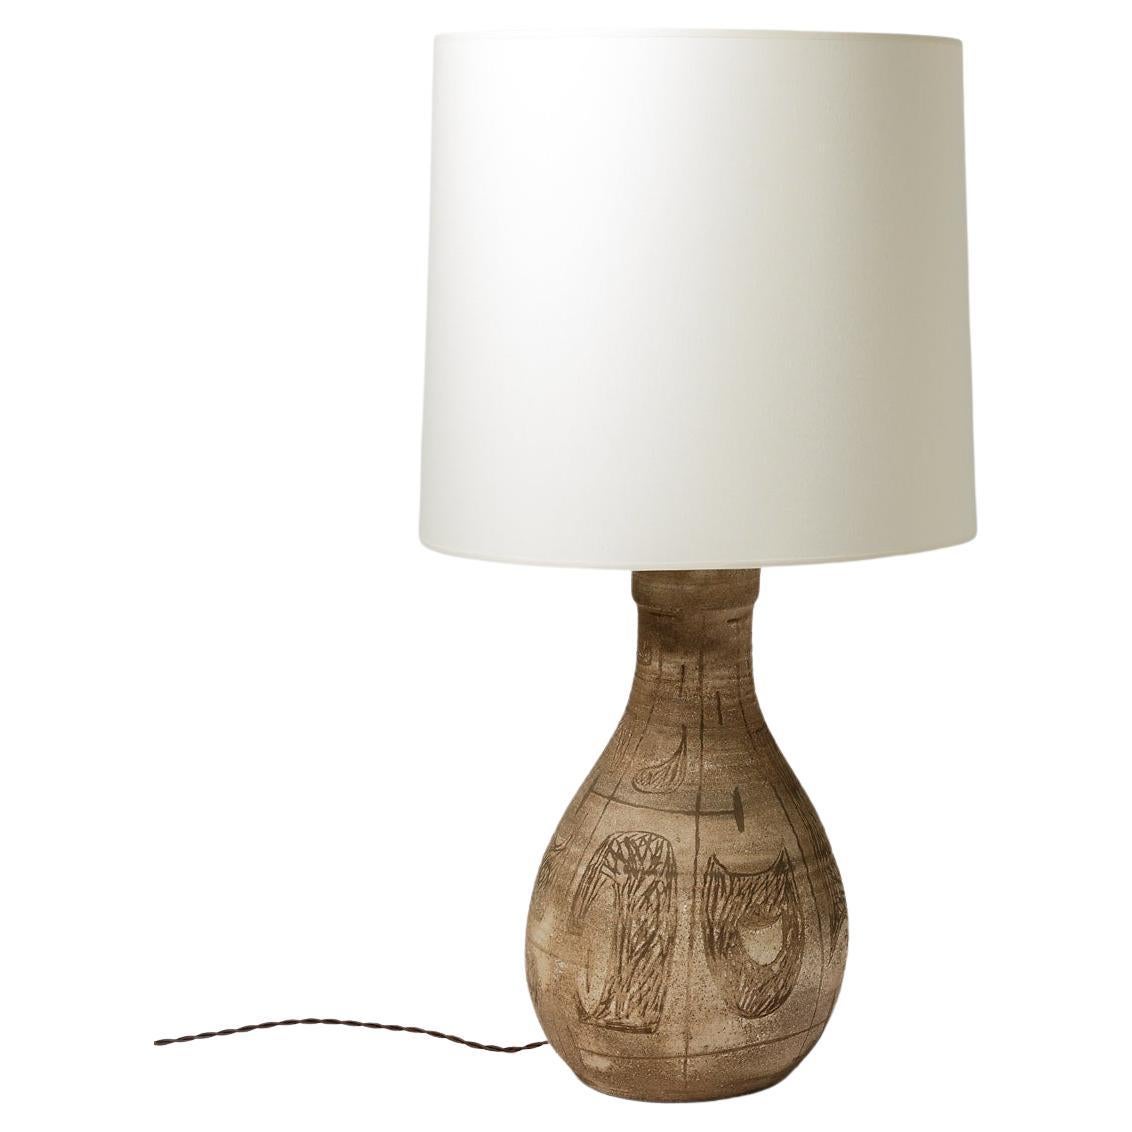 Glazed ceramic table lamp by Les potiers d’Accolay, circa 1960-1970